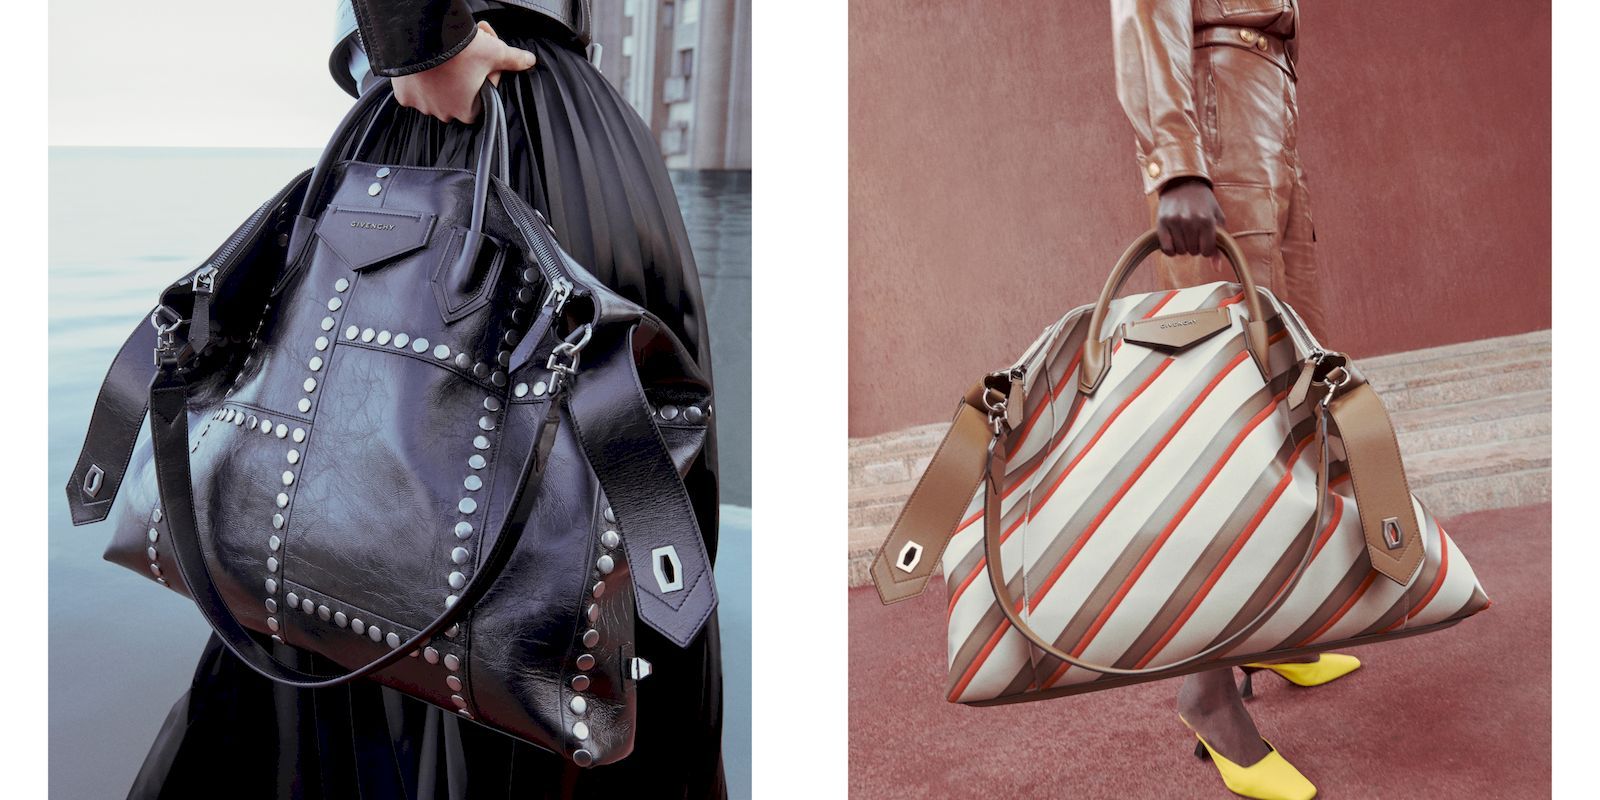 Givenchy’s new version of the Antigona bag is a versatile carryall